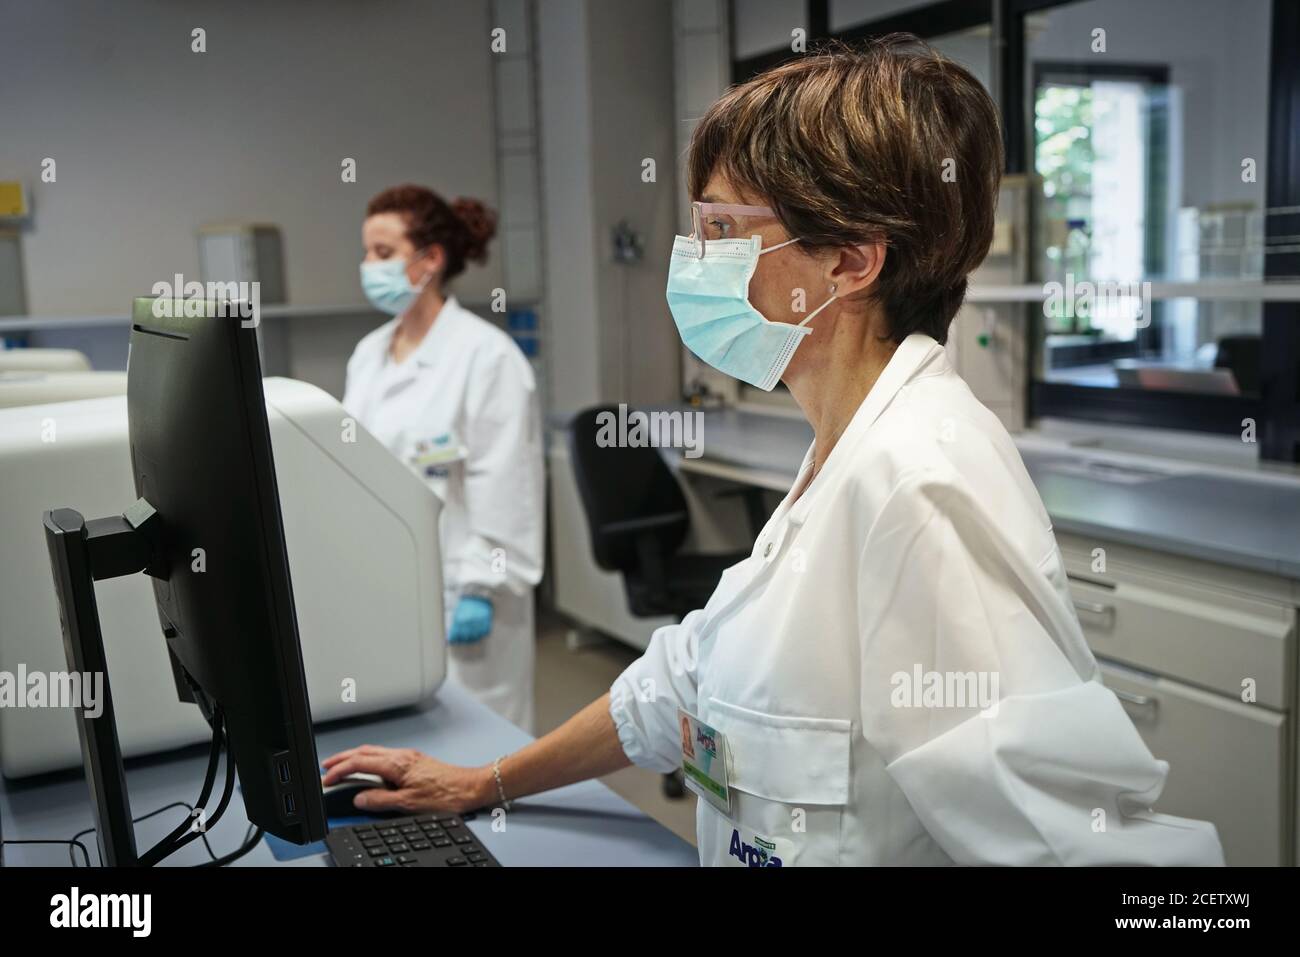 At work in the molecular biology laboratory for swab analysis for SARS-COV2 virus detection. Turin, Italy - September 2020 Stock Photo